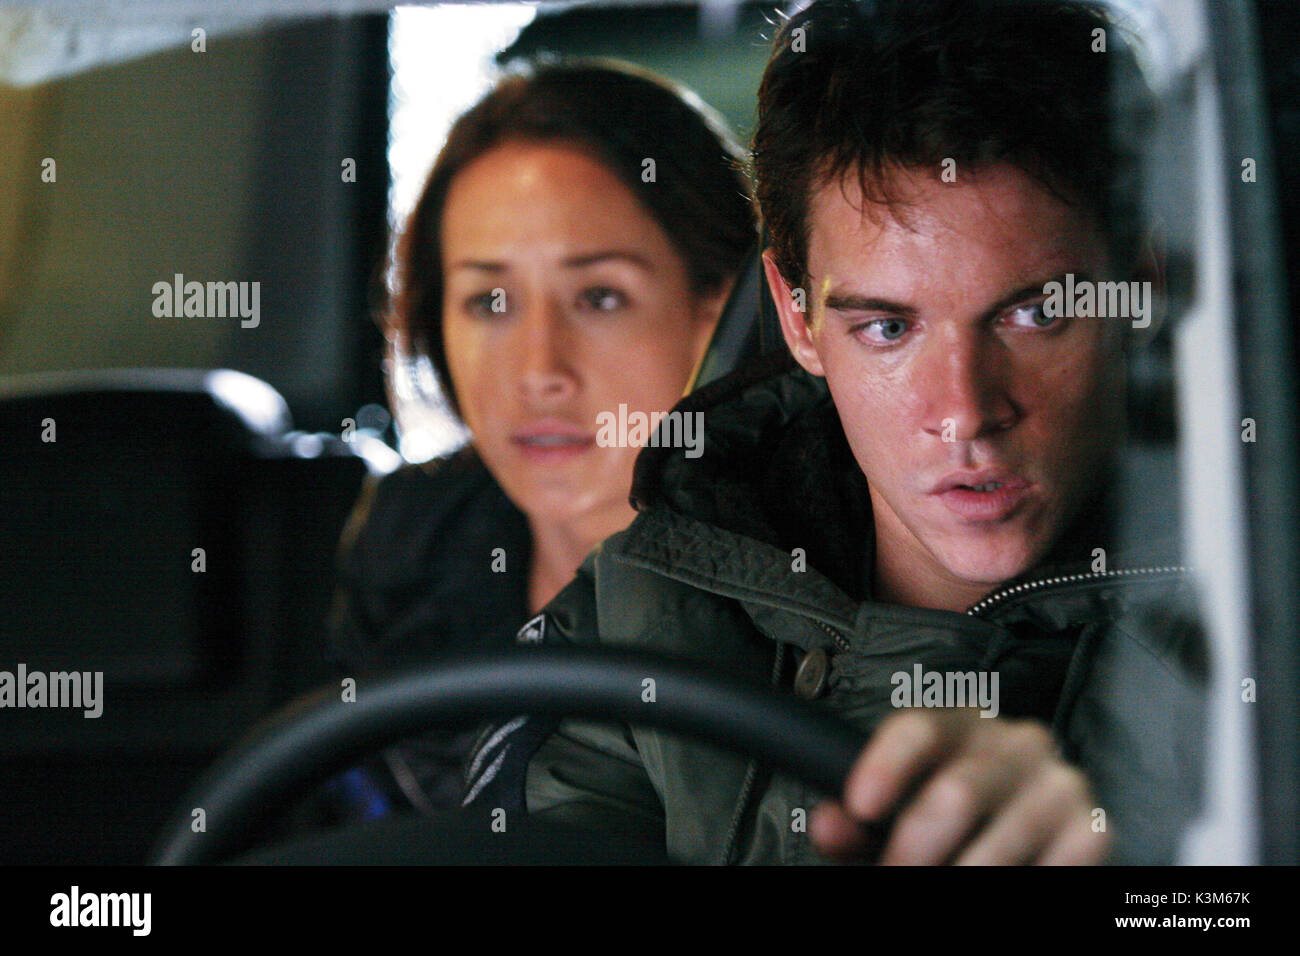 MISSION: Impossible III MAGGIE Q JONAHAN RYHS MEYERS Mission: Impossible III Datum: 2006 Stockfoto